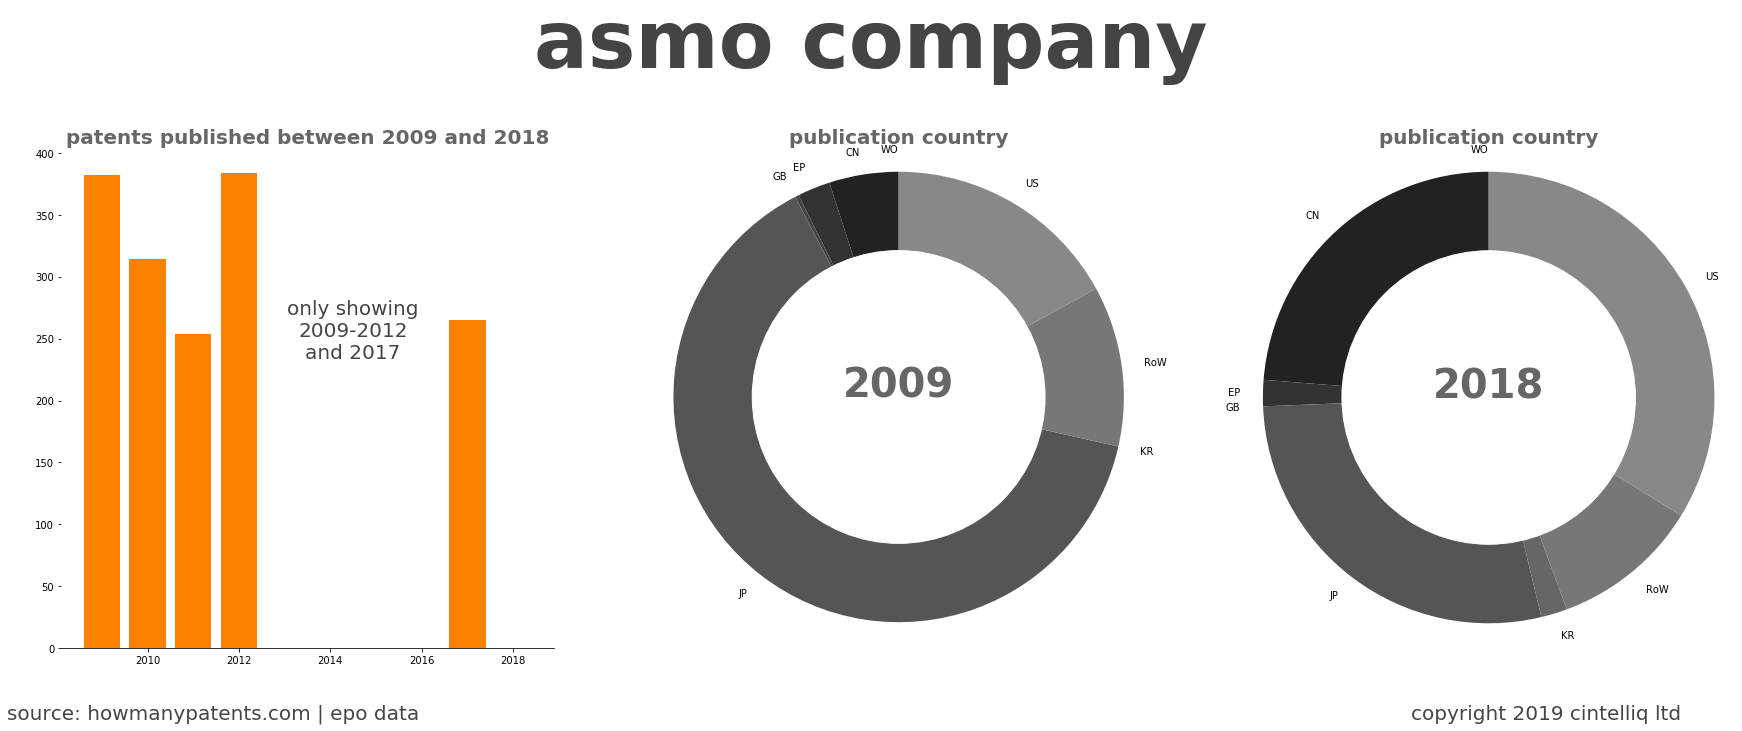 summary of patents for Asmo Company